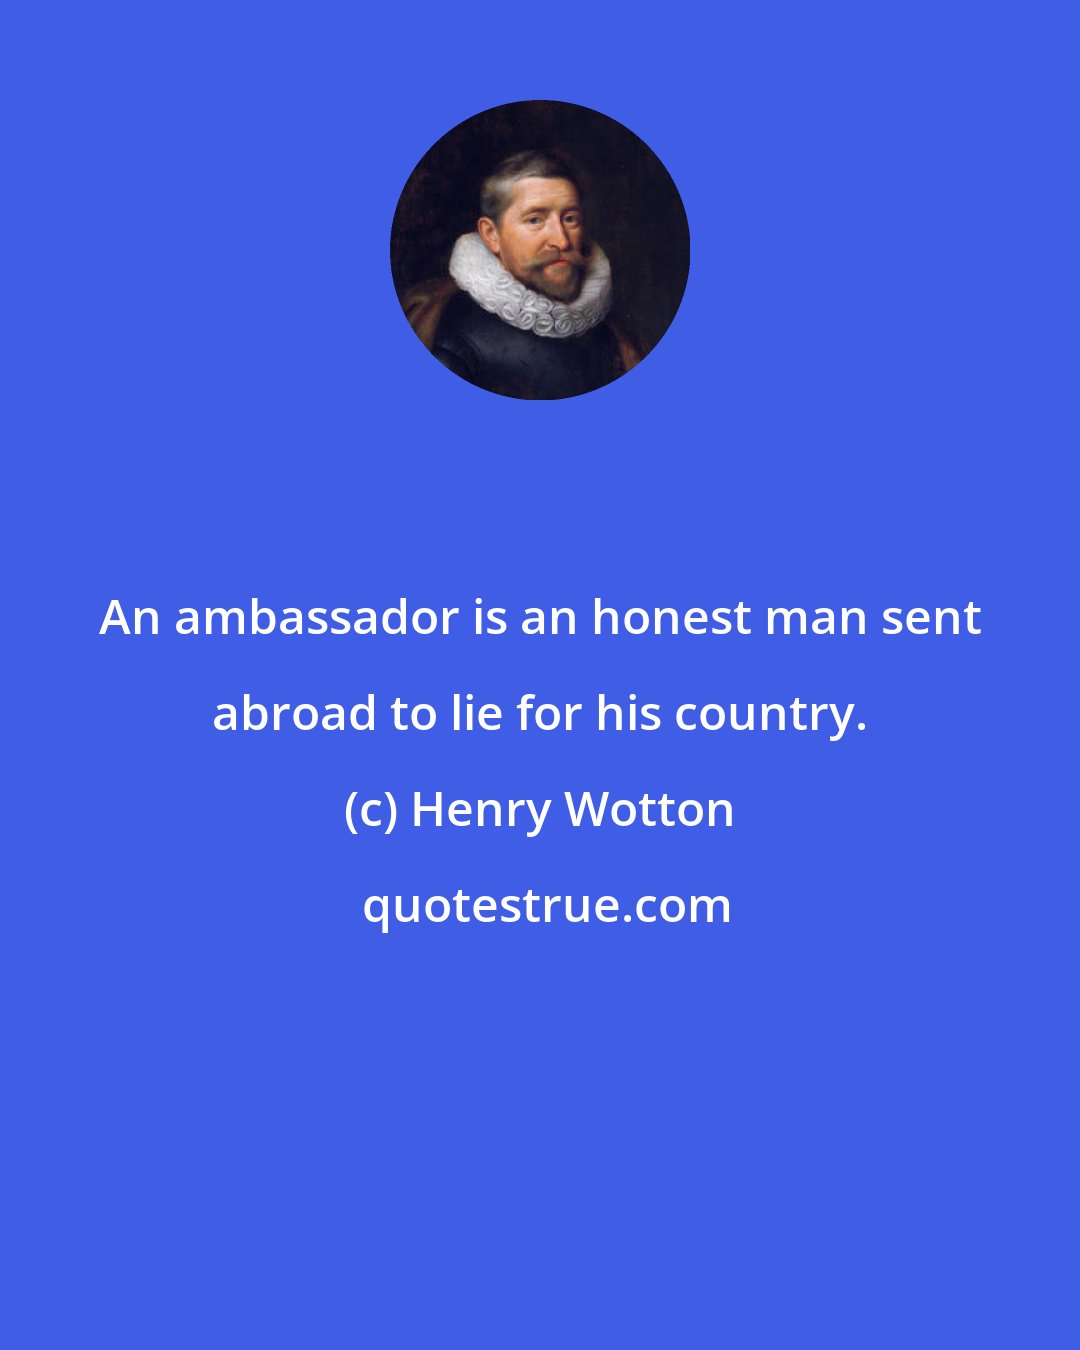 Henry Wotton: An ambassador is an honest man sent abroad to lie for his country.